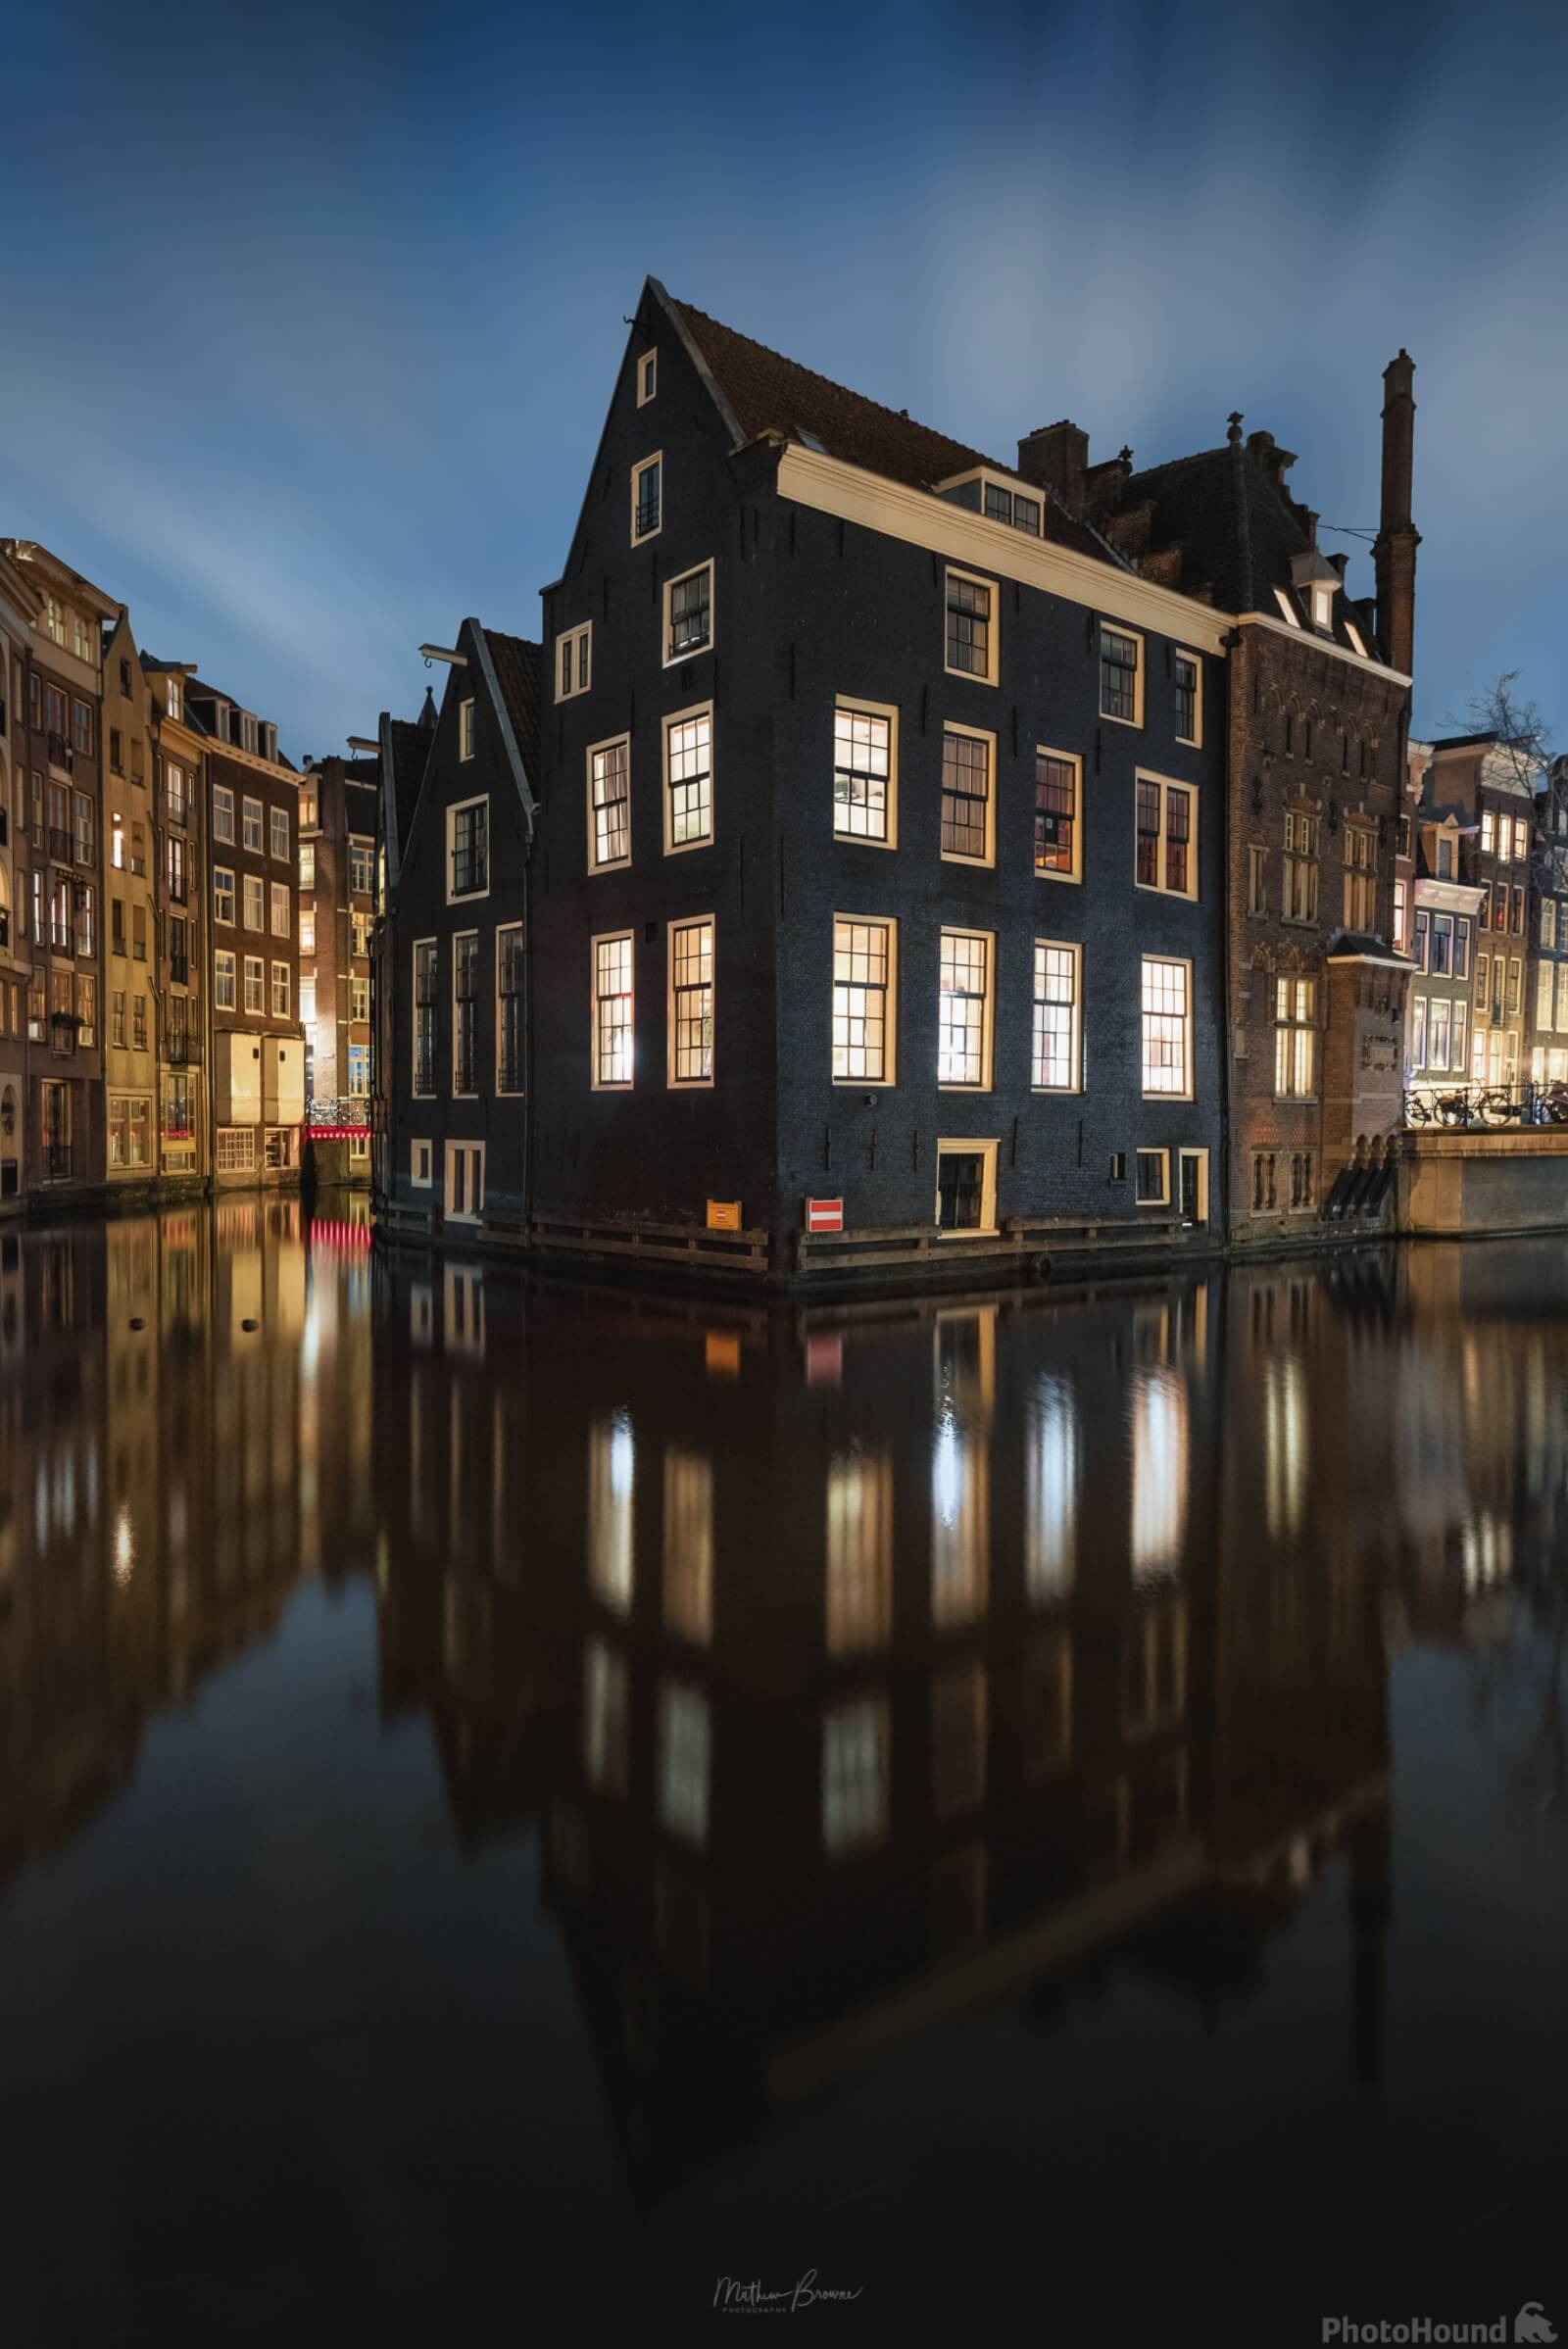 Image of House On The Water by Mathew Browne